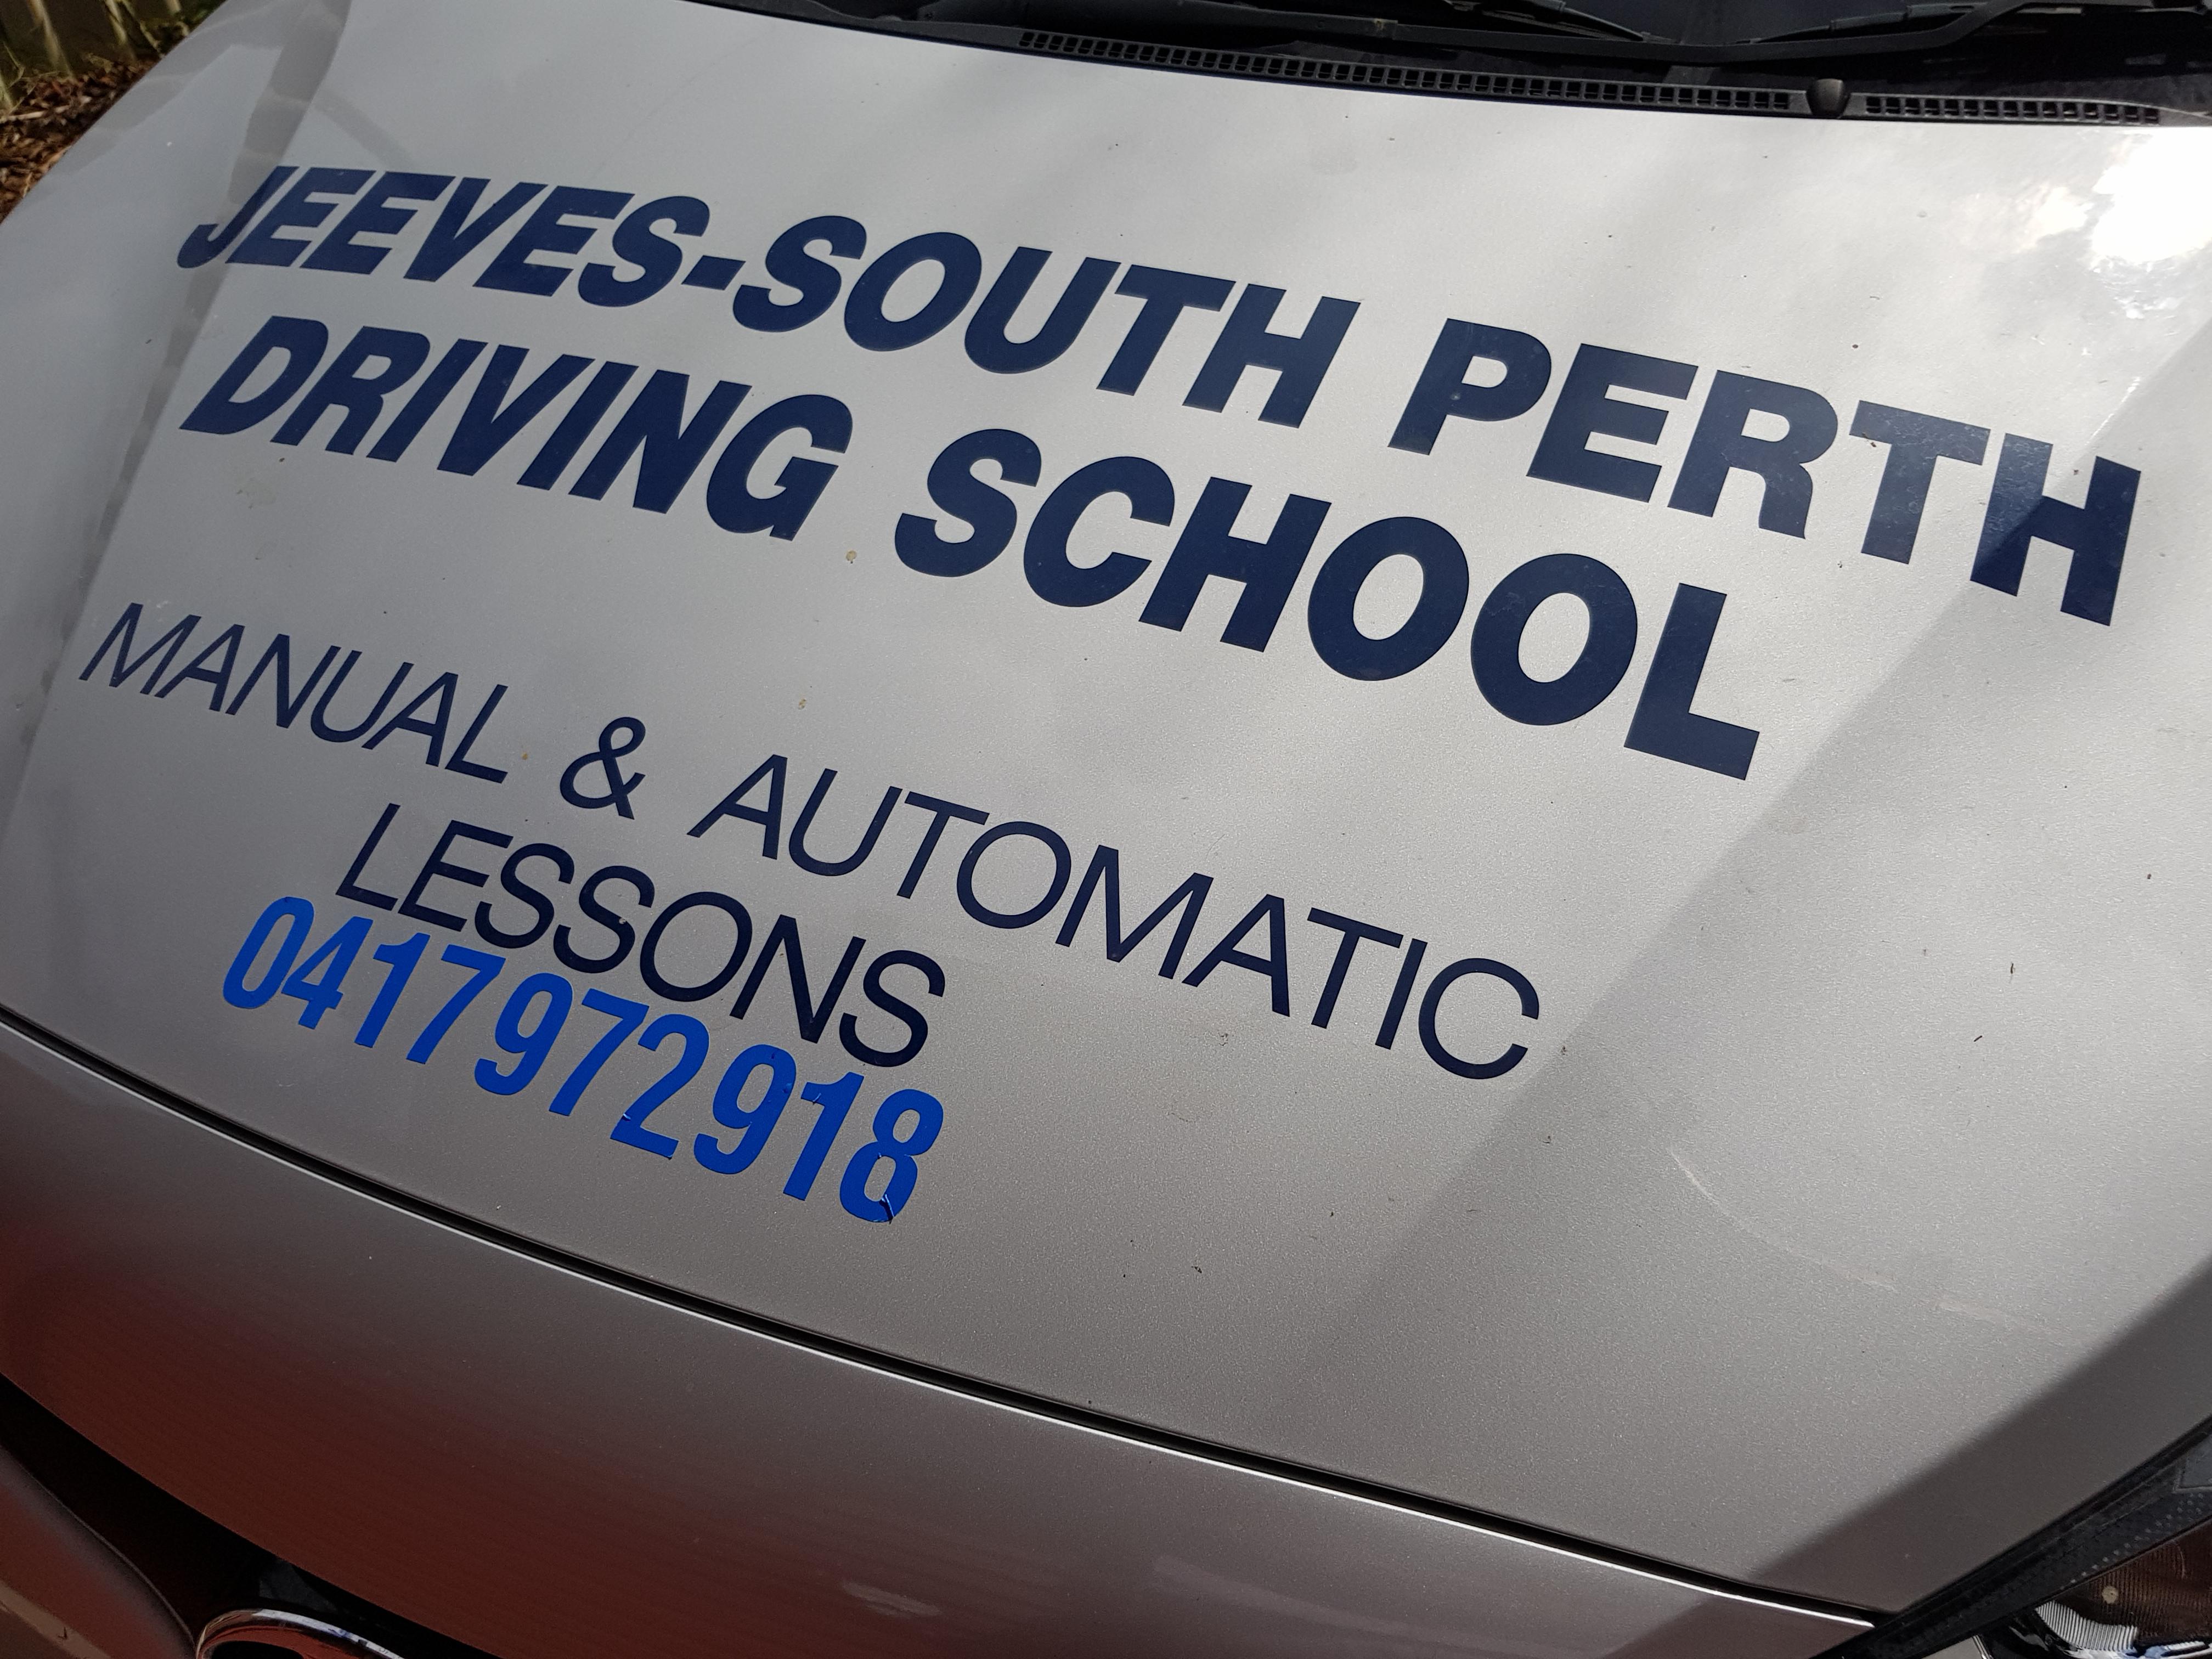 Images Jeeves Driving School